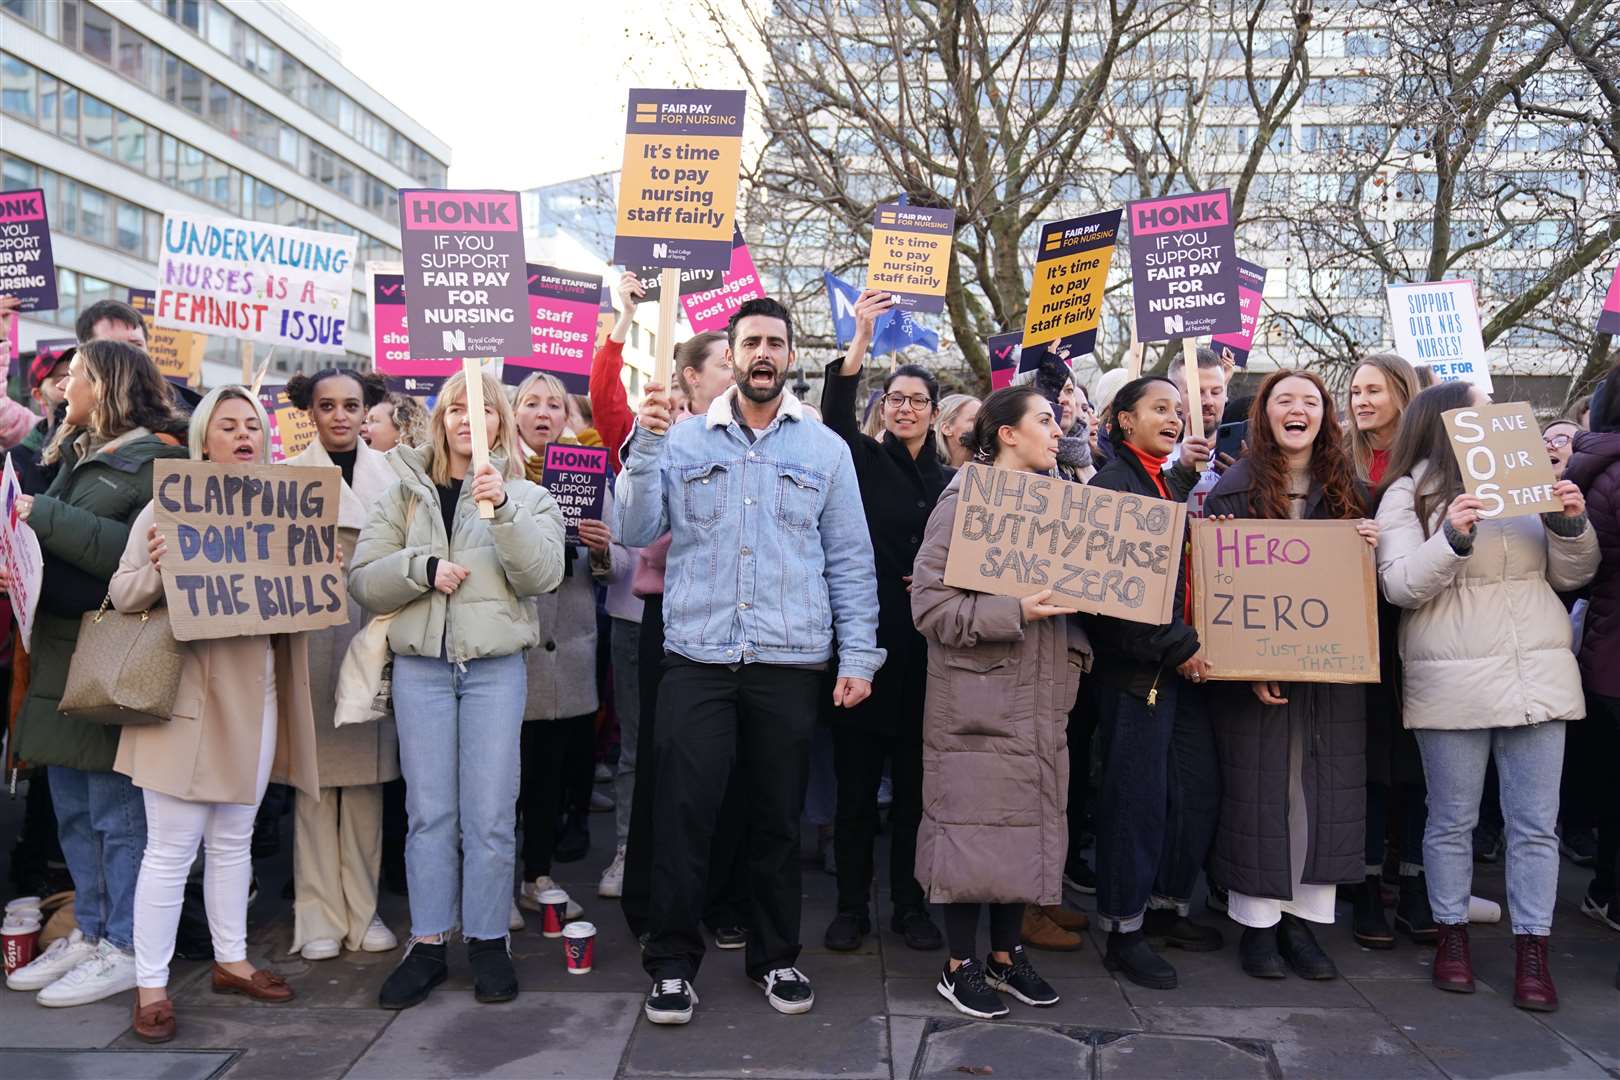 Members of the Royal College of Nursing on strike earlier this week (Kirsty O’Connor/PA)